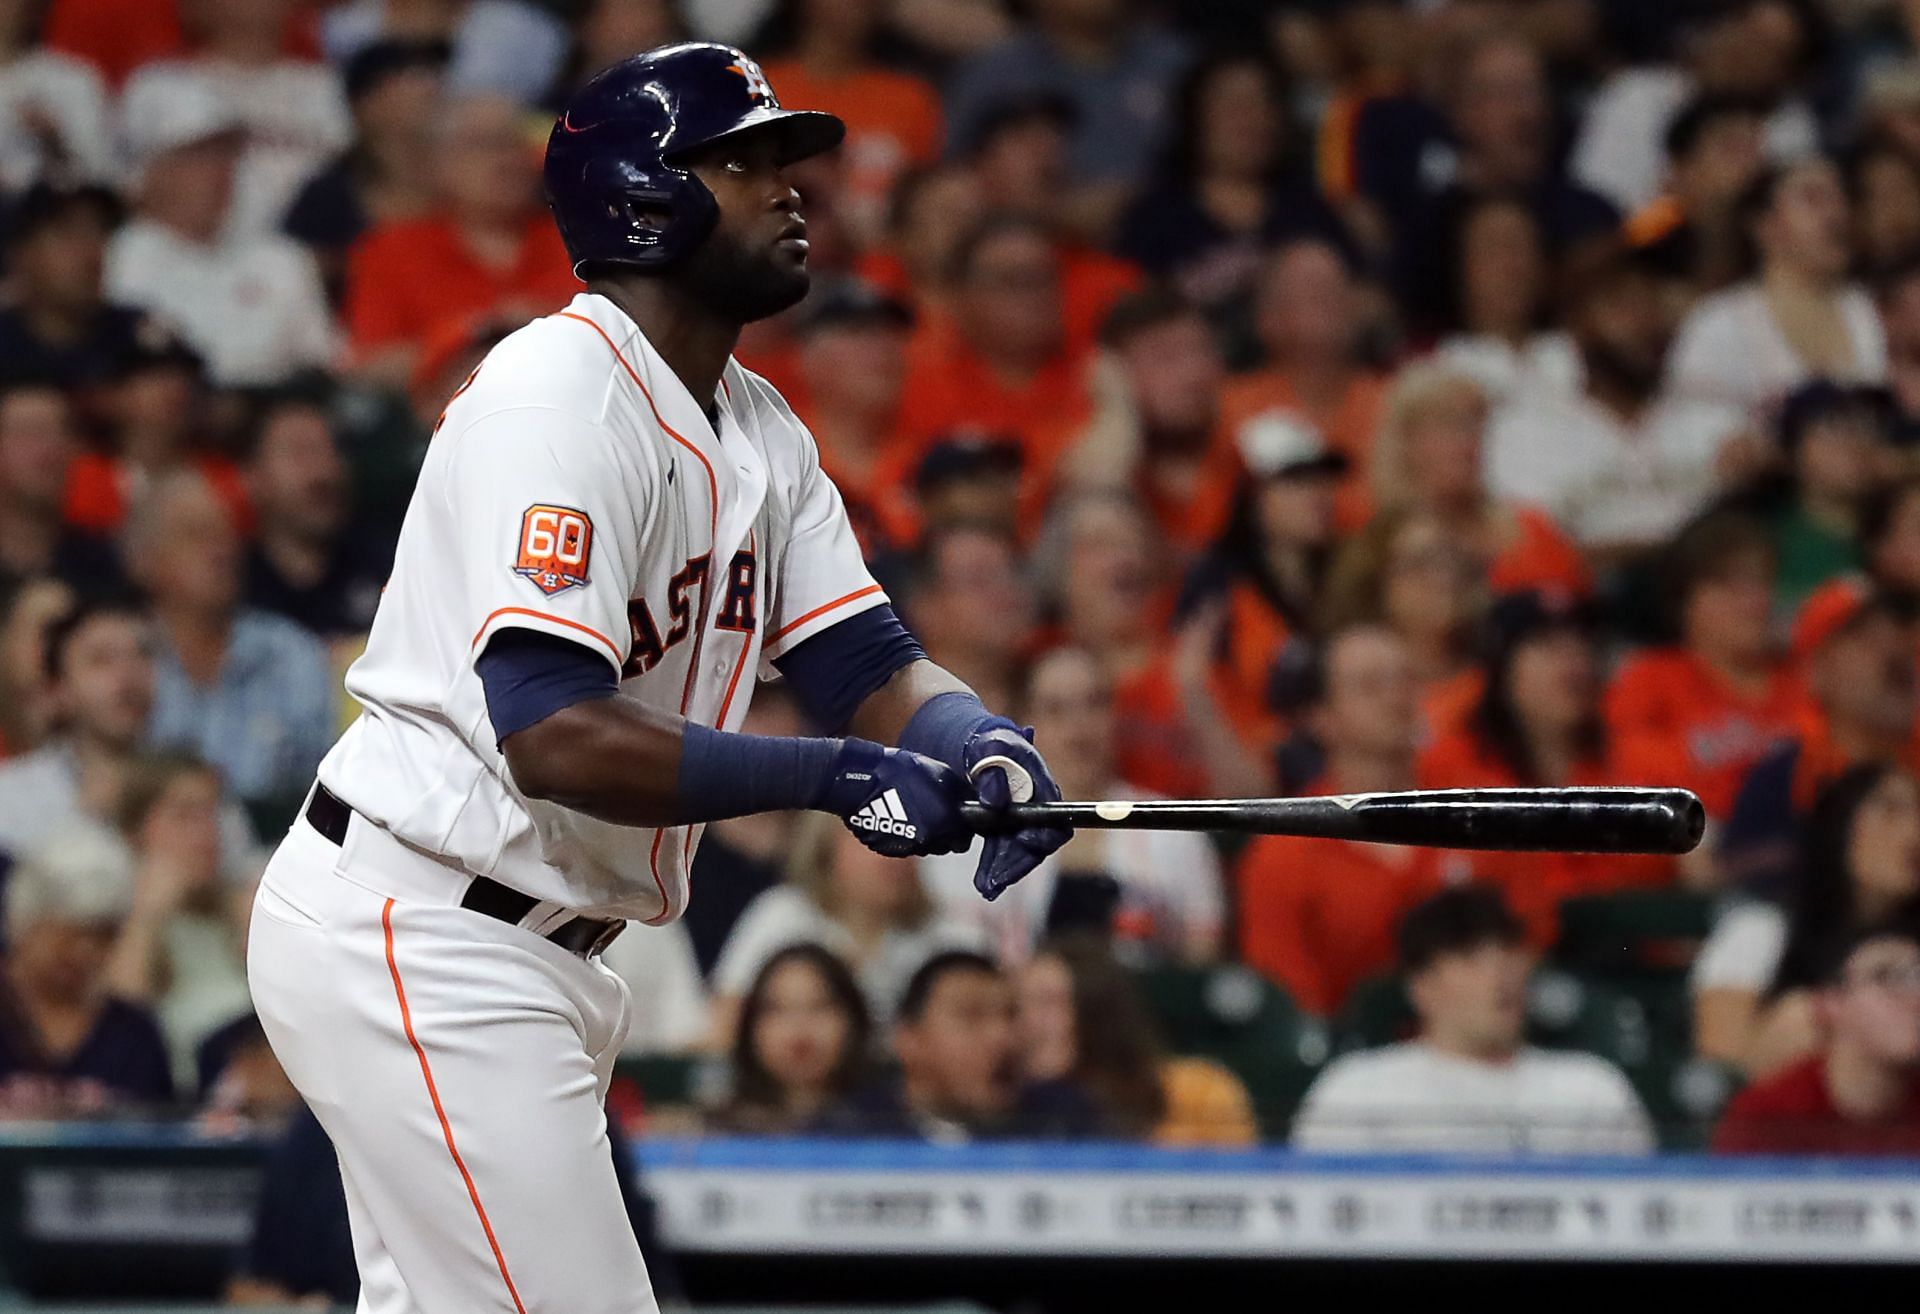 Yordan Alvarez leads his team &mdash; and is second in the majors &mdash; with 11 home runs.